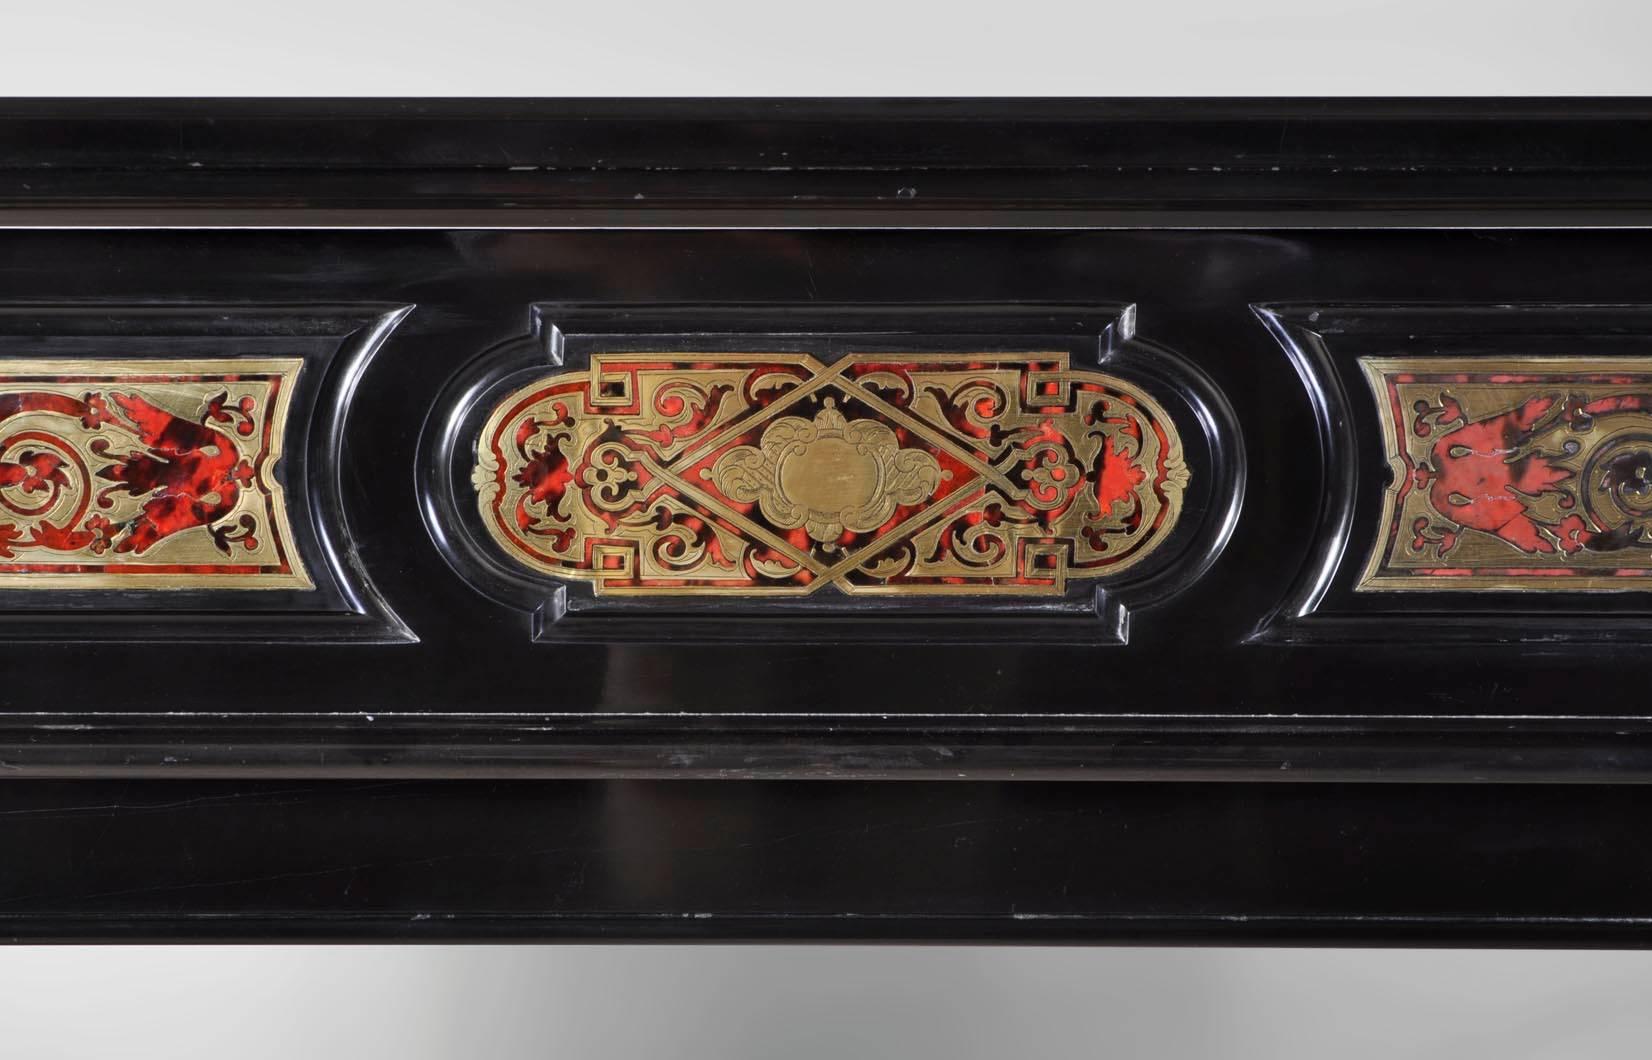 Unusual antique Napoleon III period fireplace sculpted out black marble from Belgium marble with Boulle marquetry inlays. 
This marquetry technique, very decorative, allows a rich polychrome decor. Created during the 17th century in France, this